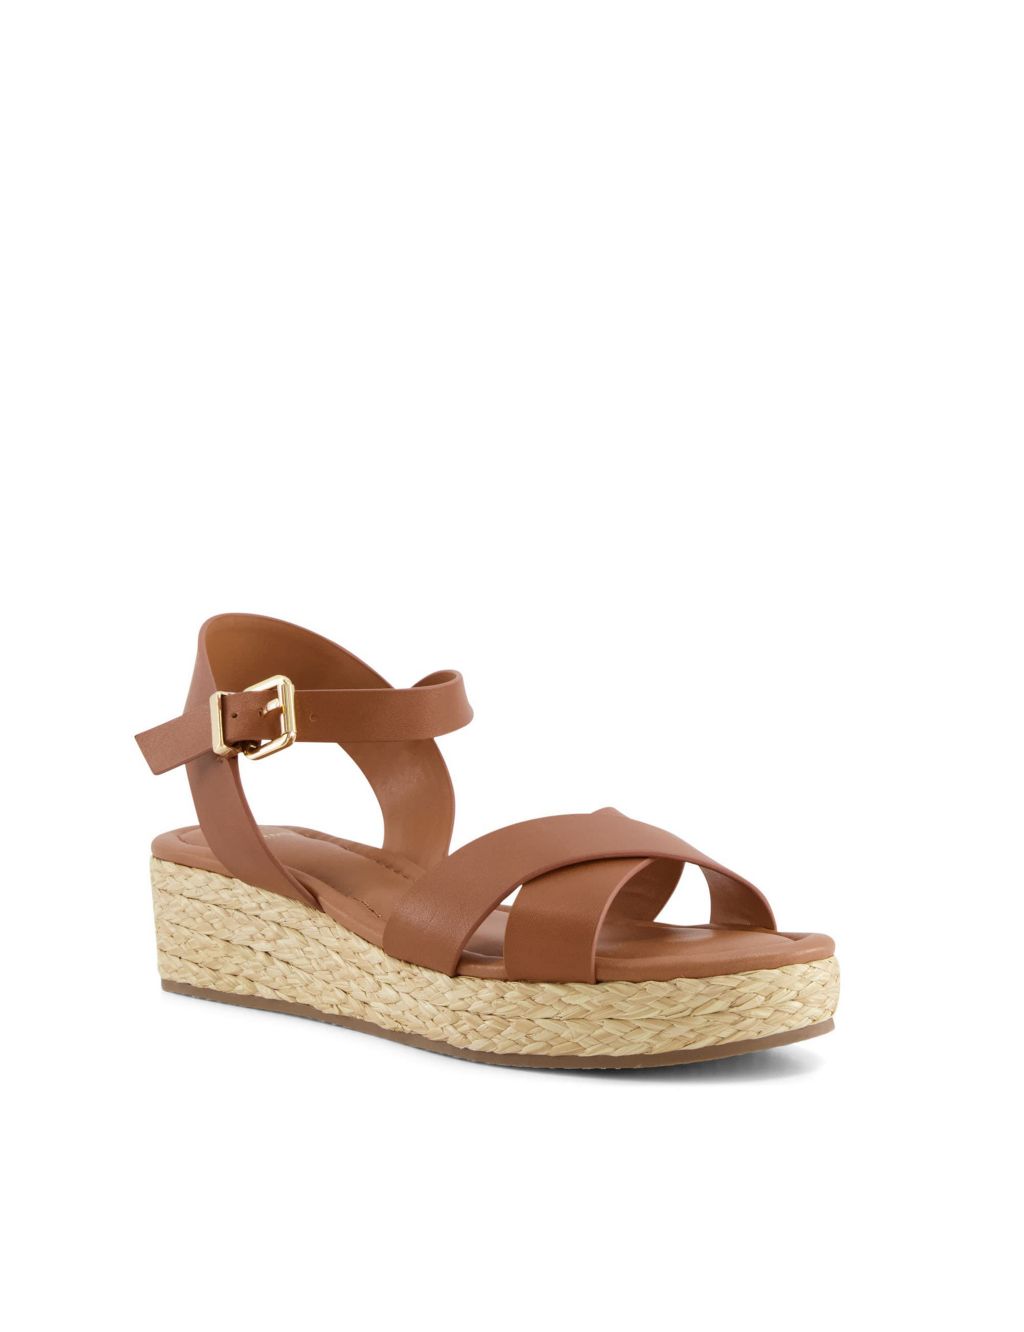 Leather Ankle Strap Wedge Sandals image 3